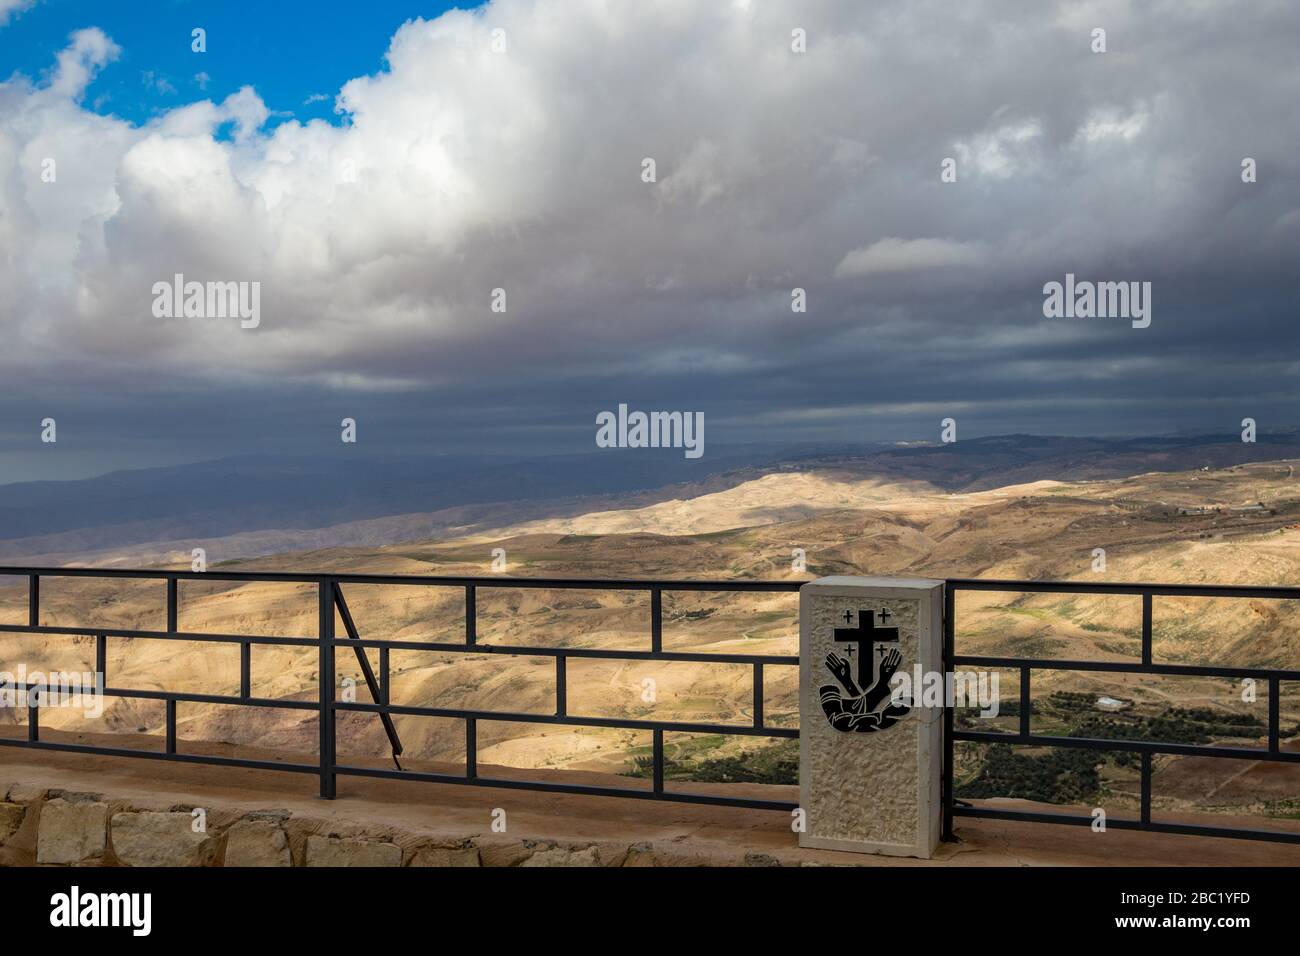 Fence with coat of arms, Memorial Basilica of Moses, Mount Nebo, Jordan. Scenery blurred colorful winter landscape of the Promised Land in the background Stock Photo